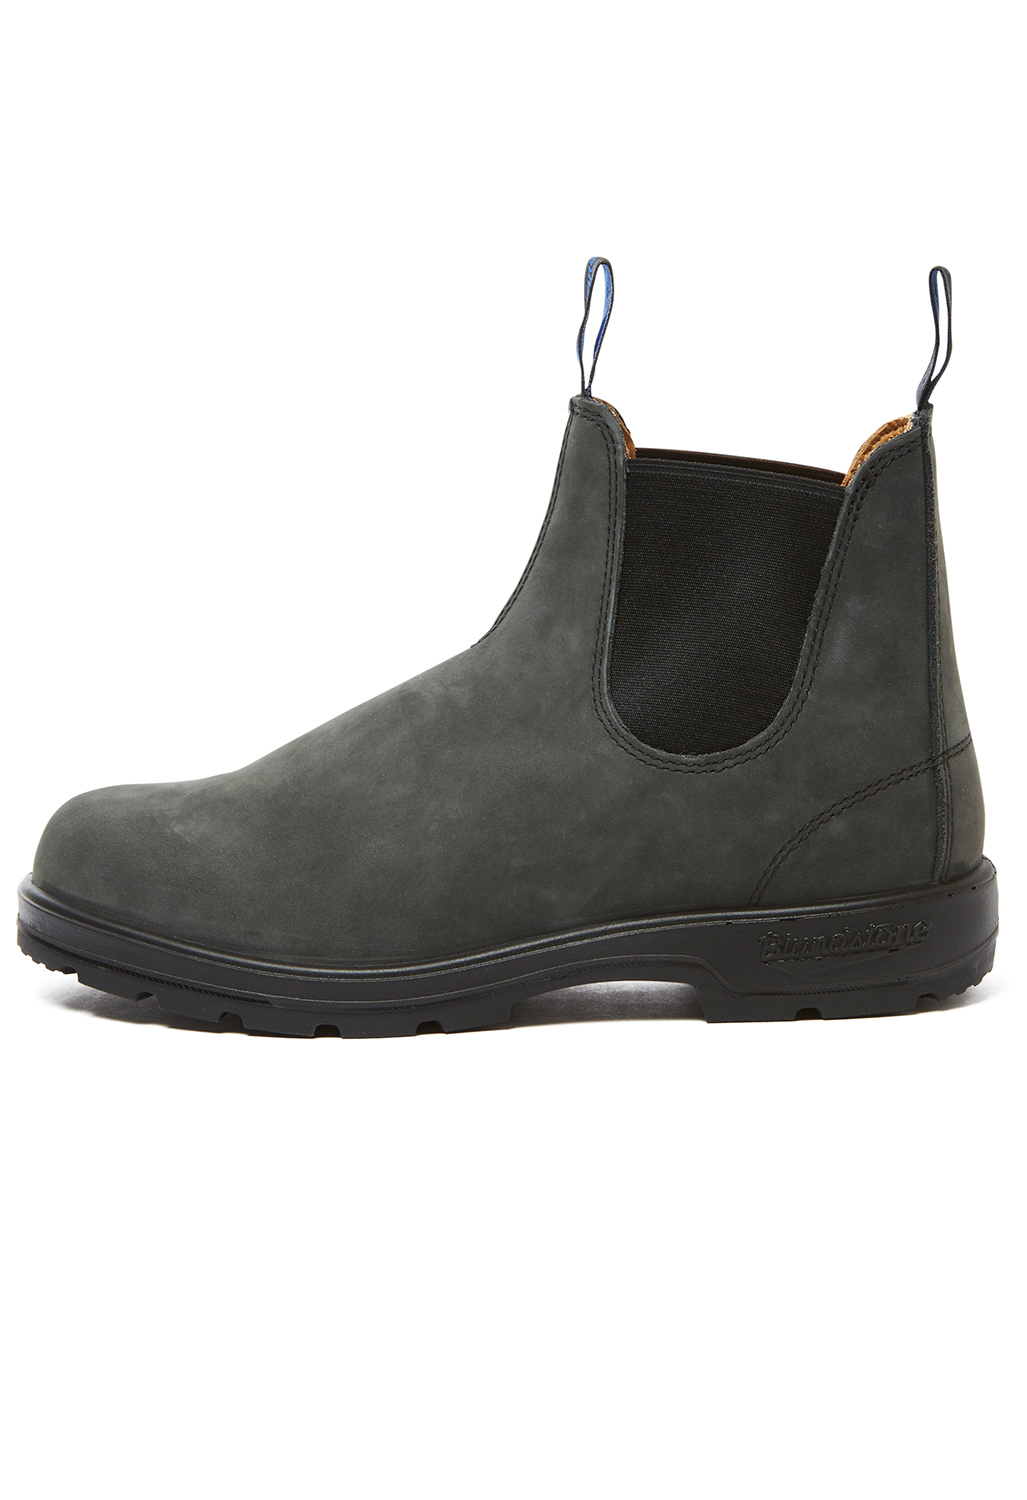 Blundstone 1478 Boots